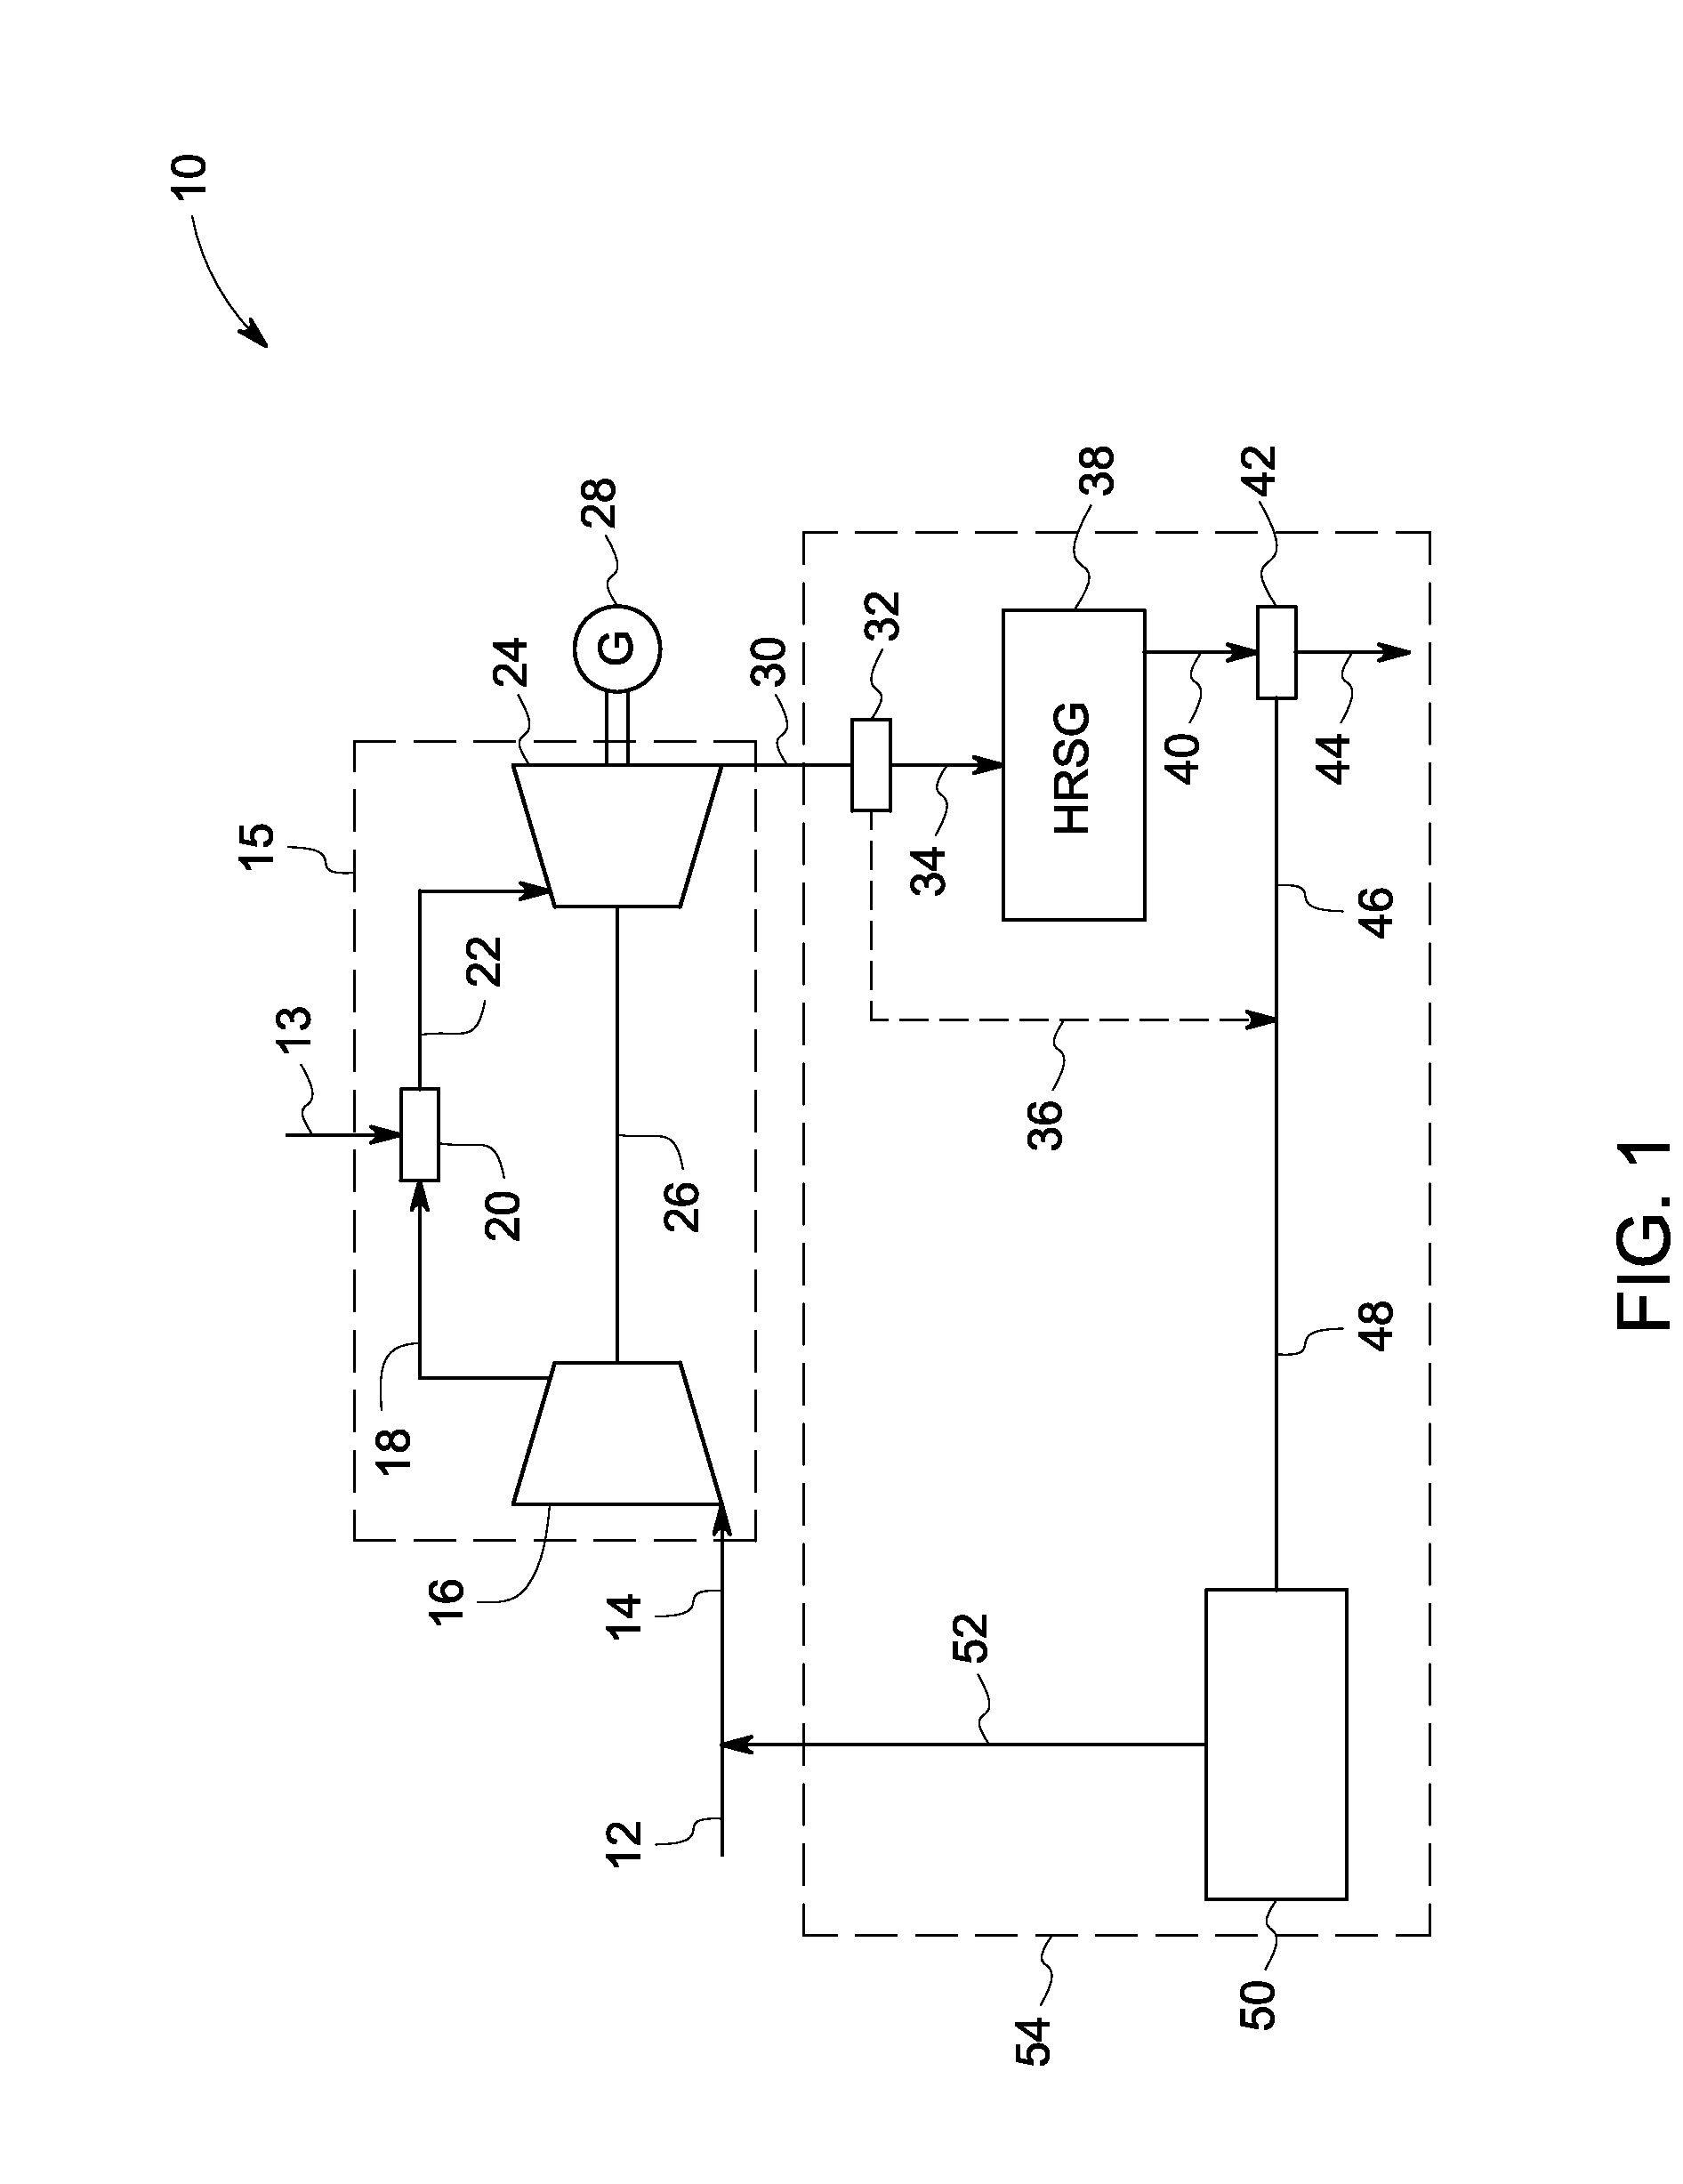 Systems and methods for power generation with exhaust gas recirculation